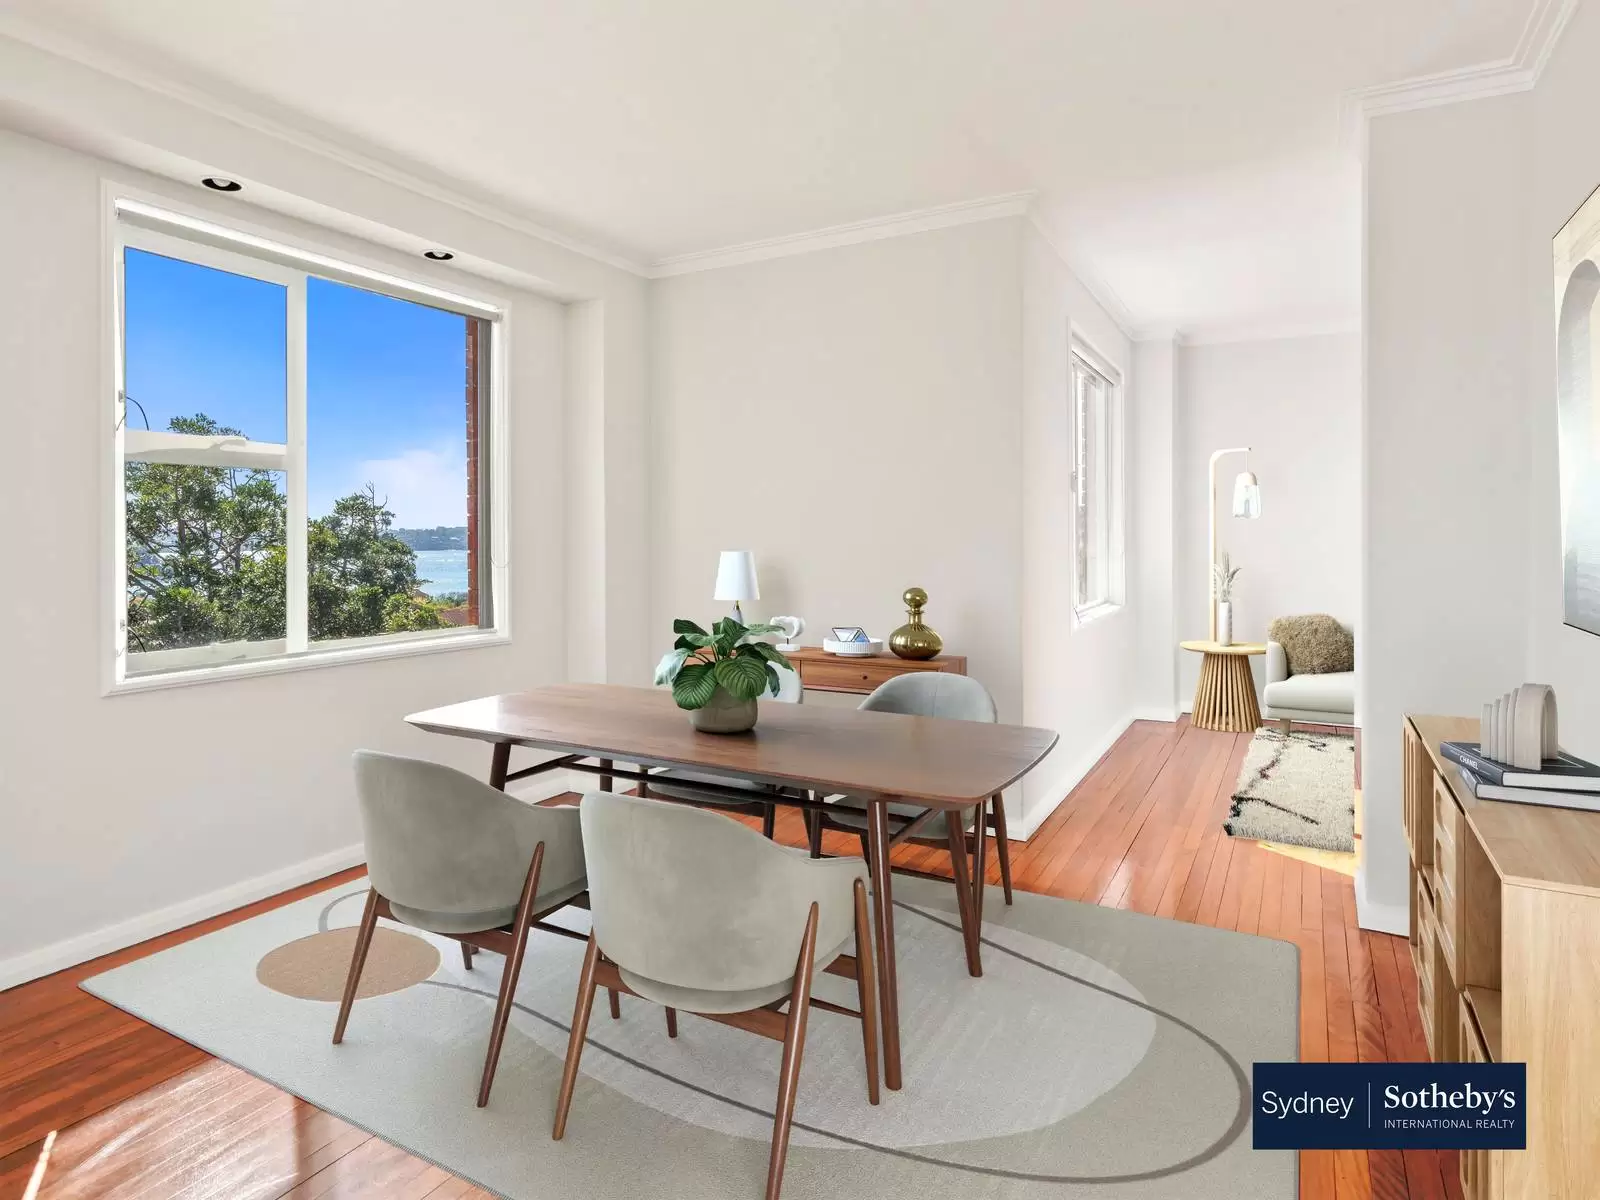 9/175 Bellevue Road, Double Bay Leased by Sydney Sotheby's International Realty - image 4